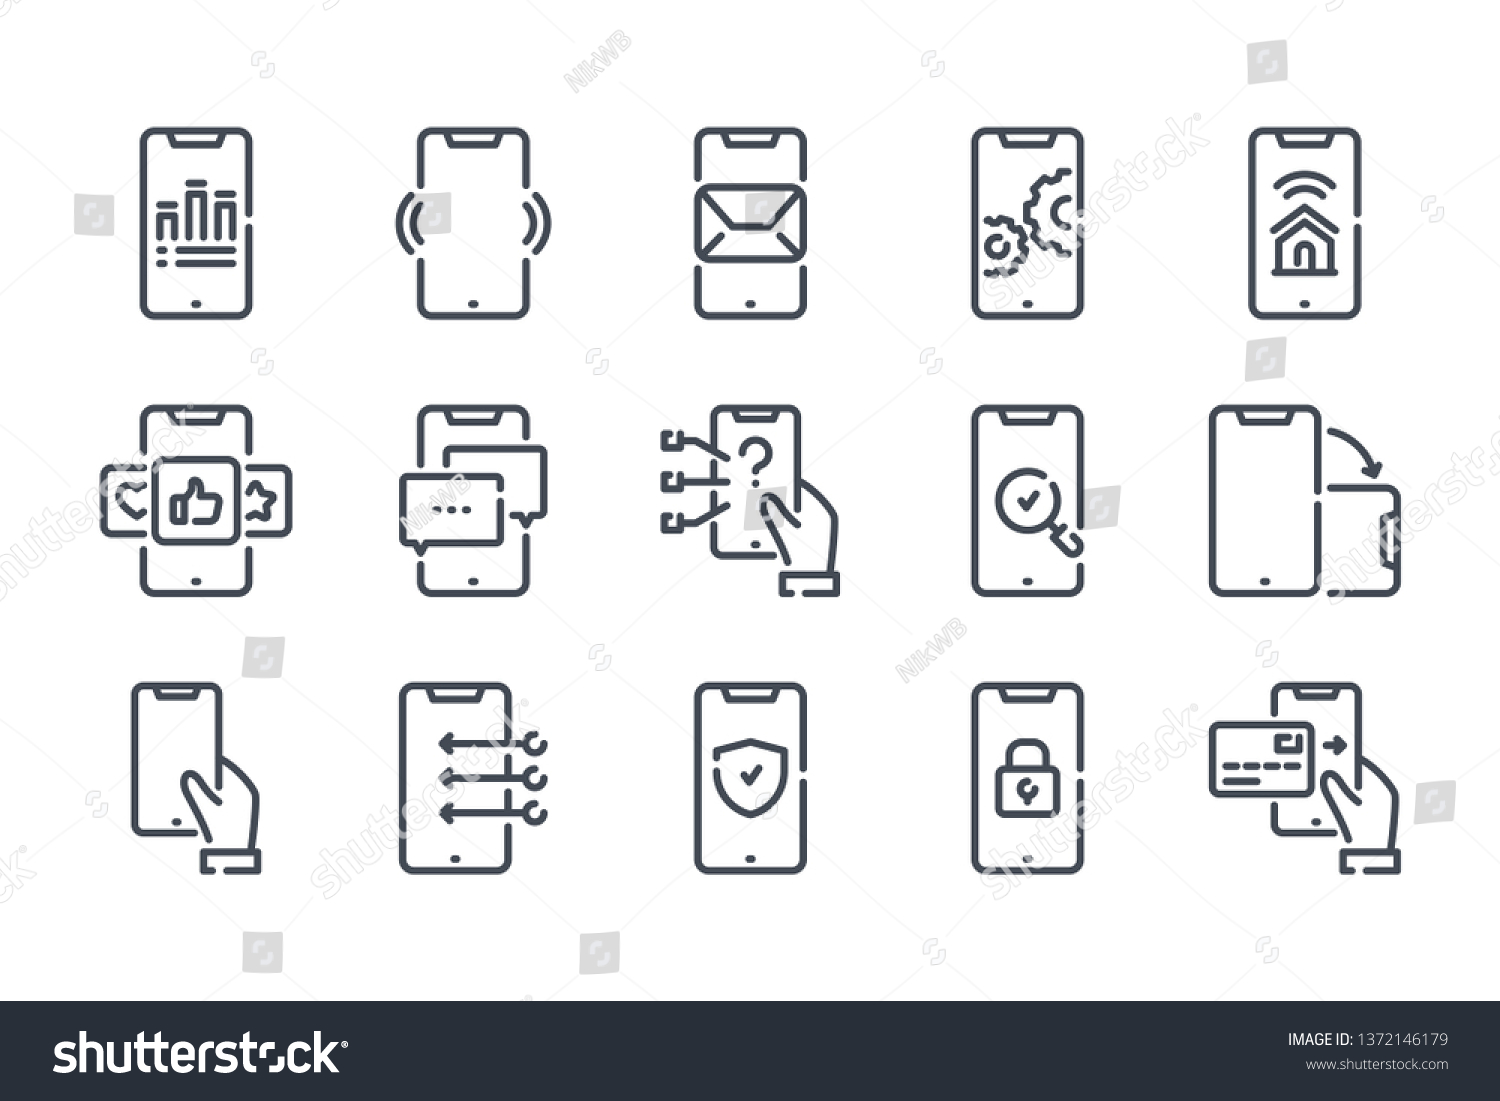 Smartphone services related line icon set. Mobile phone linear icons. Mobile technology outline vector sign collection. #1372146179